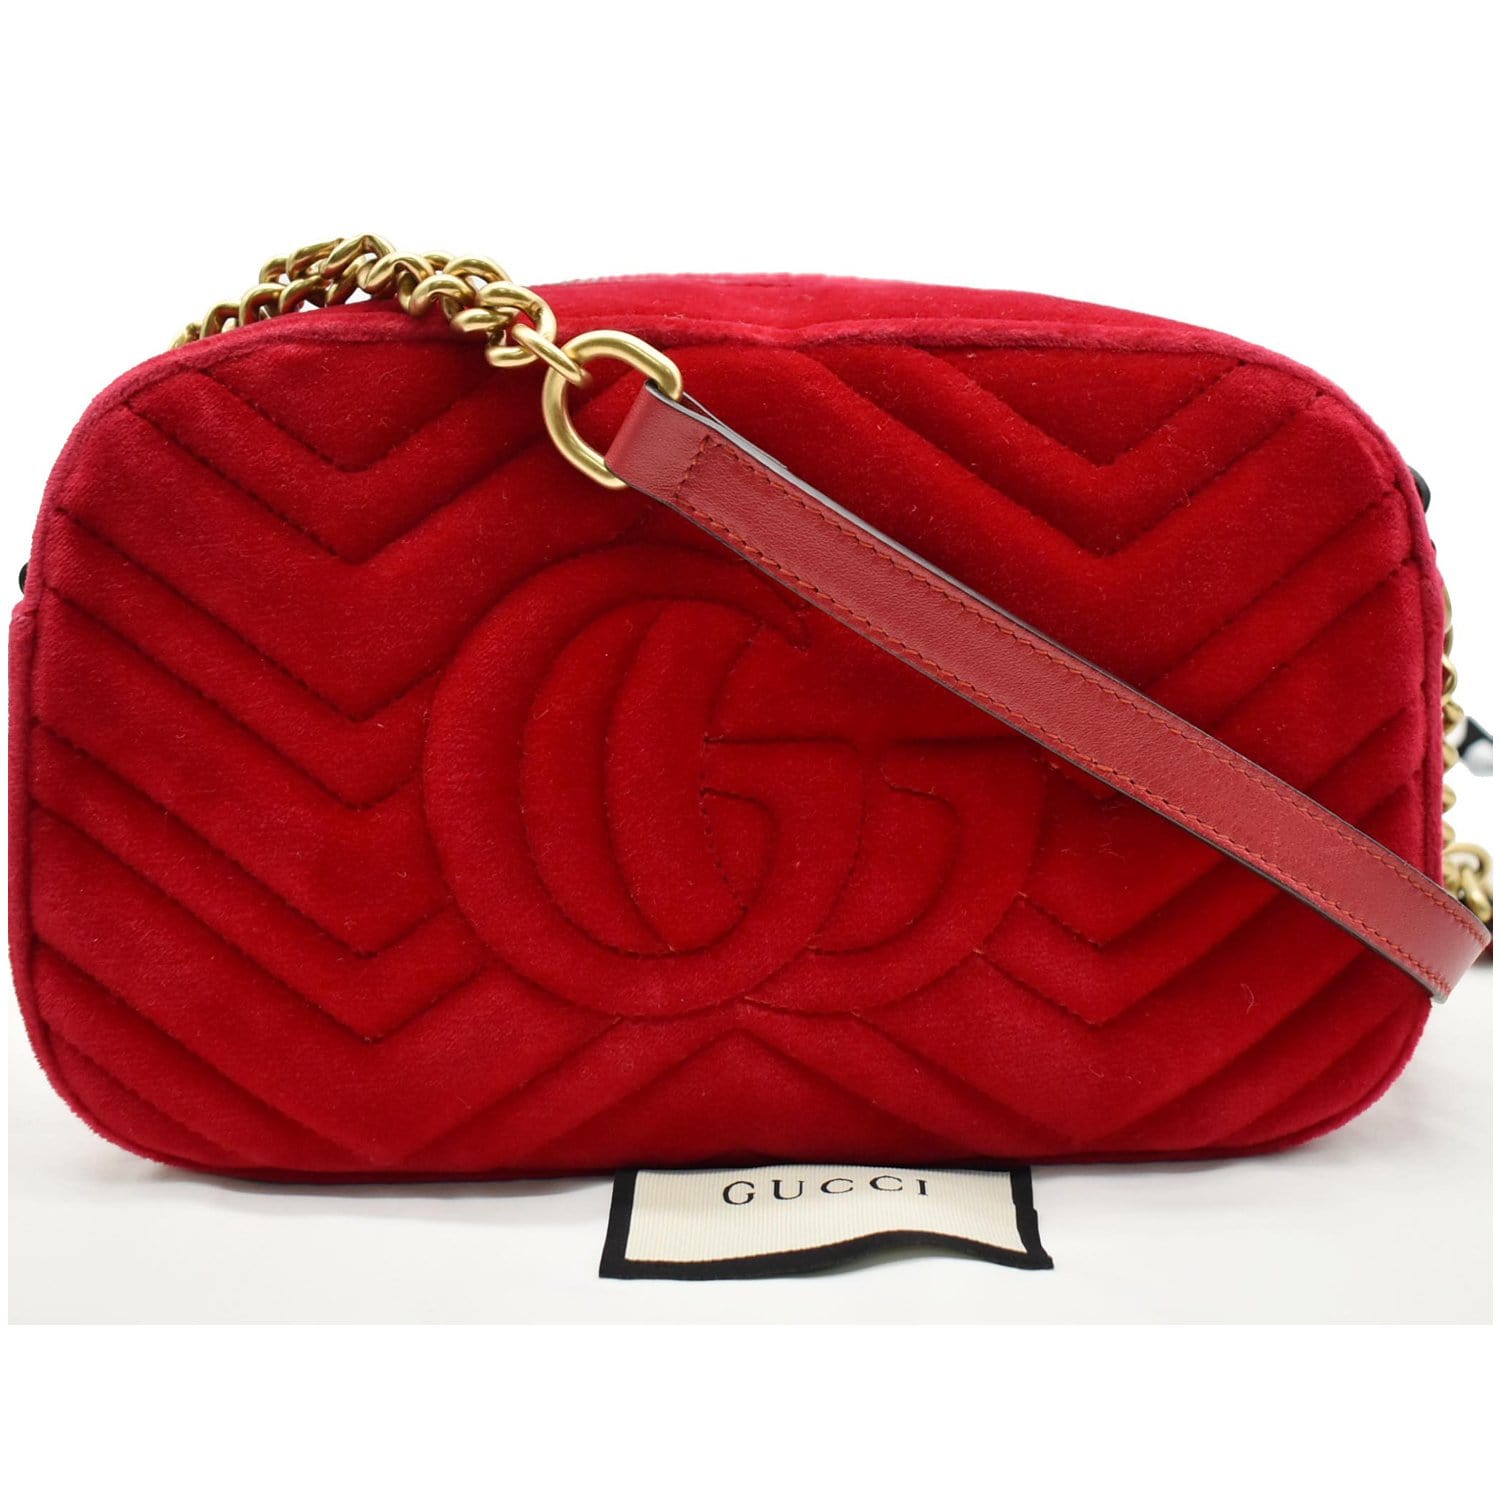 New Gucci marmont 22cm red